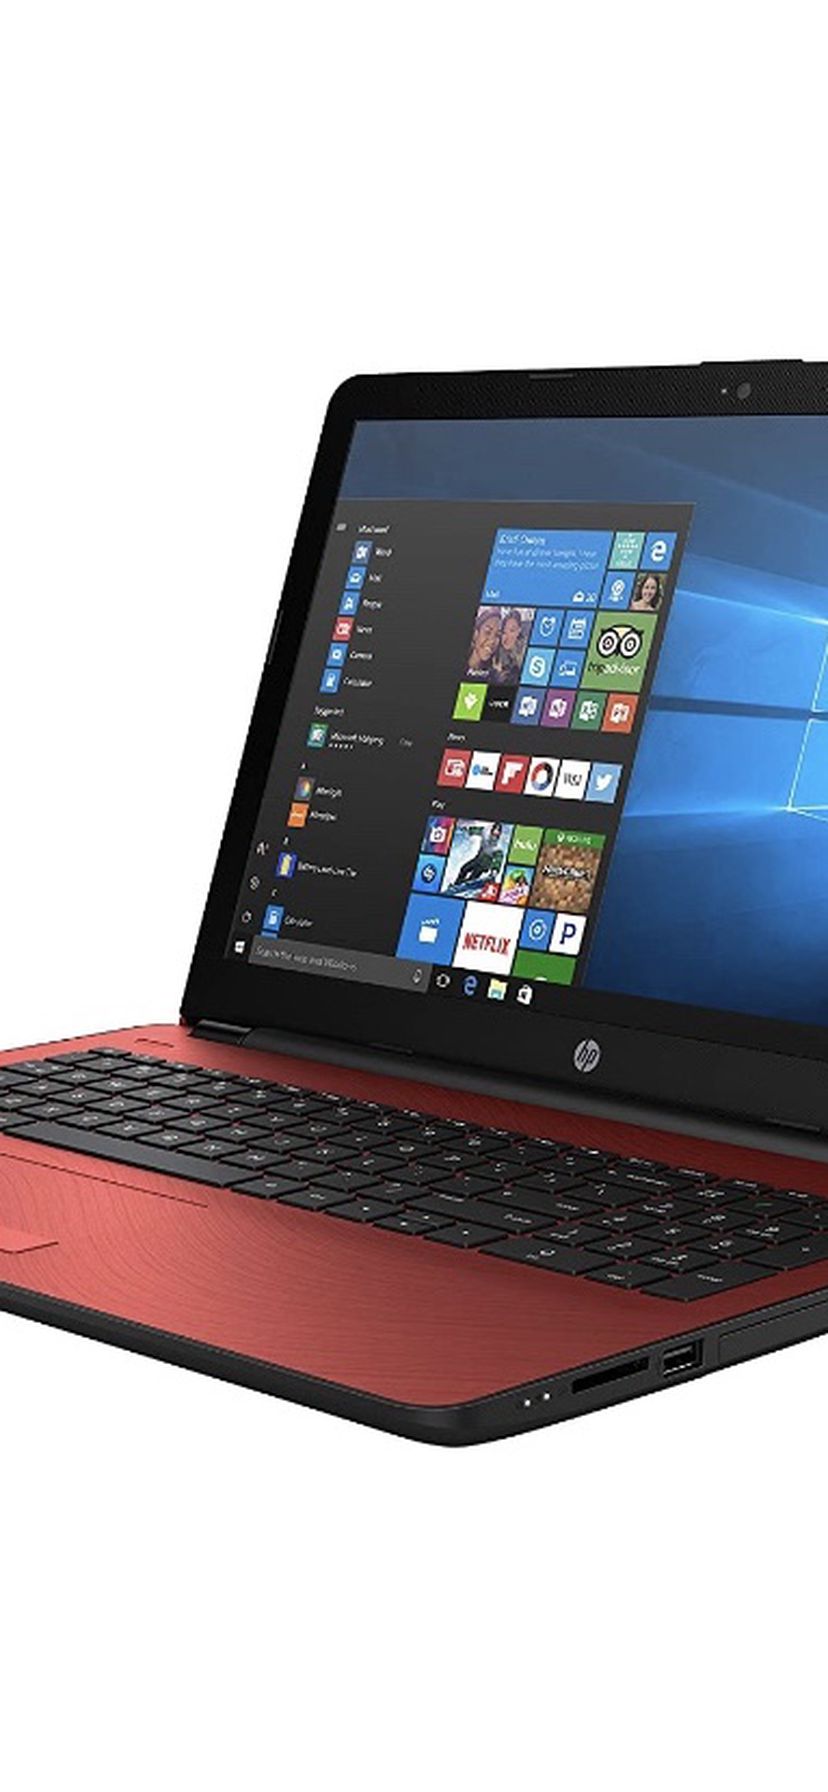 RED hp note book, has touchscreen and runs very smoothly